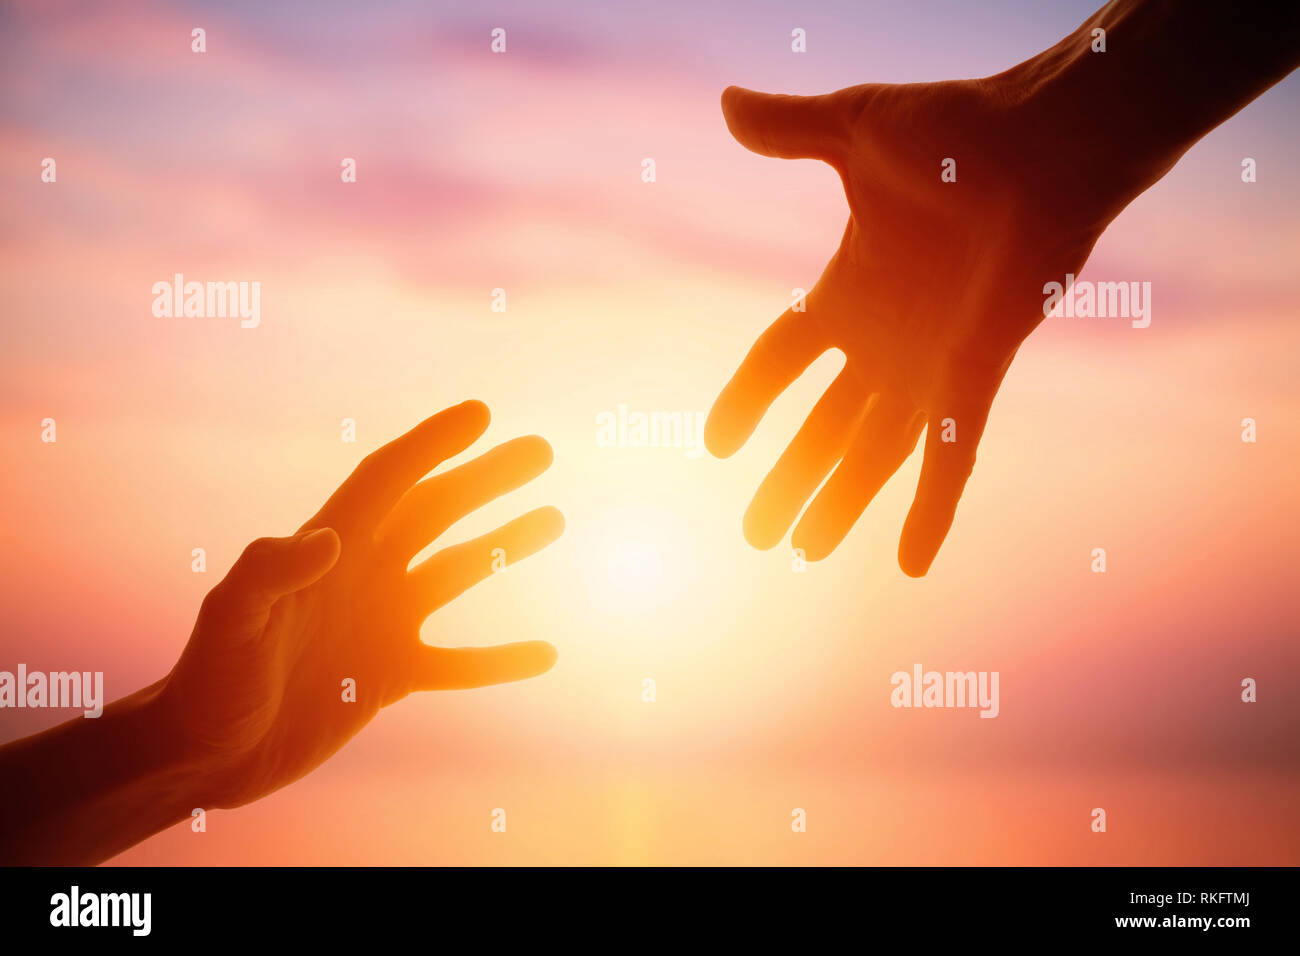 Giving a helping hand on the background of the dawn Stock Photo